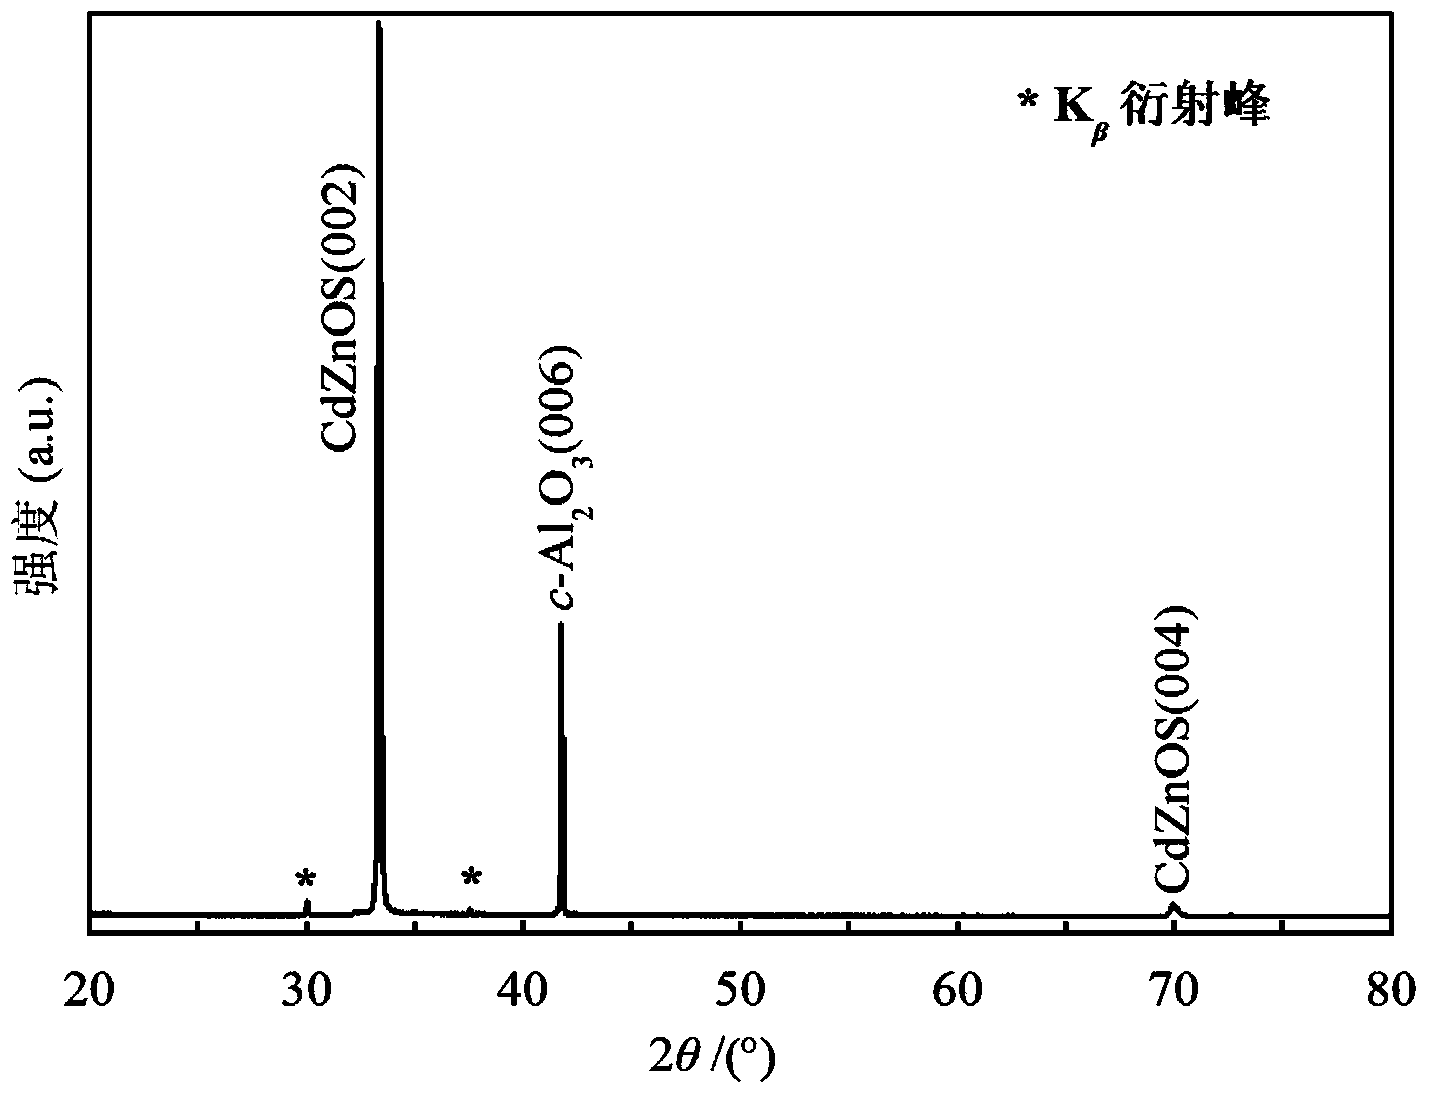 CdZnOS quaternary ZnO alloy semiconductor material and preparation method thereof